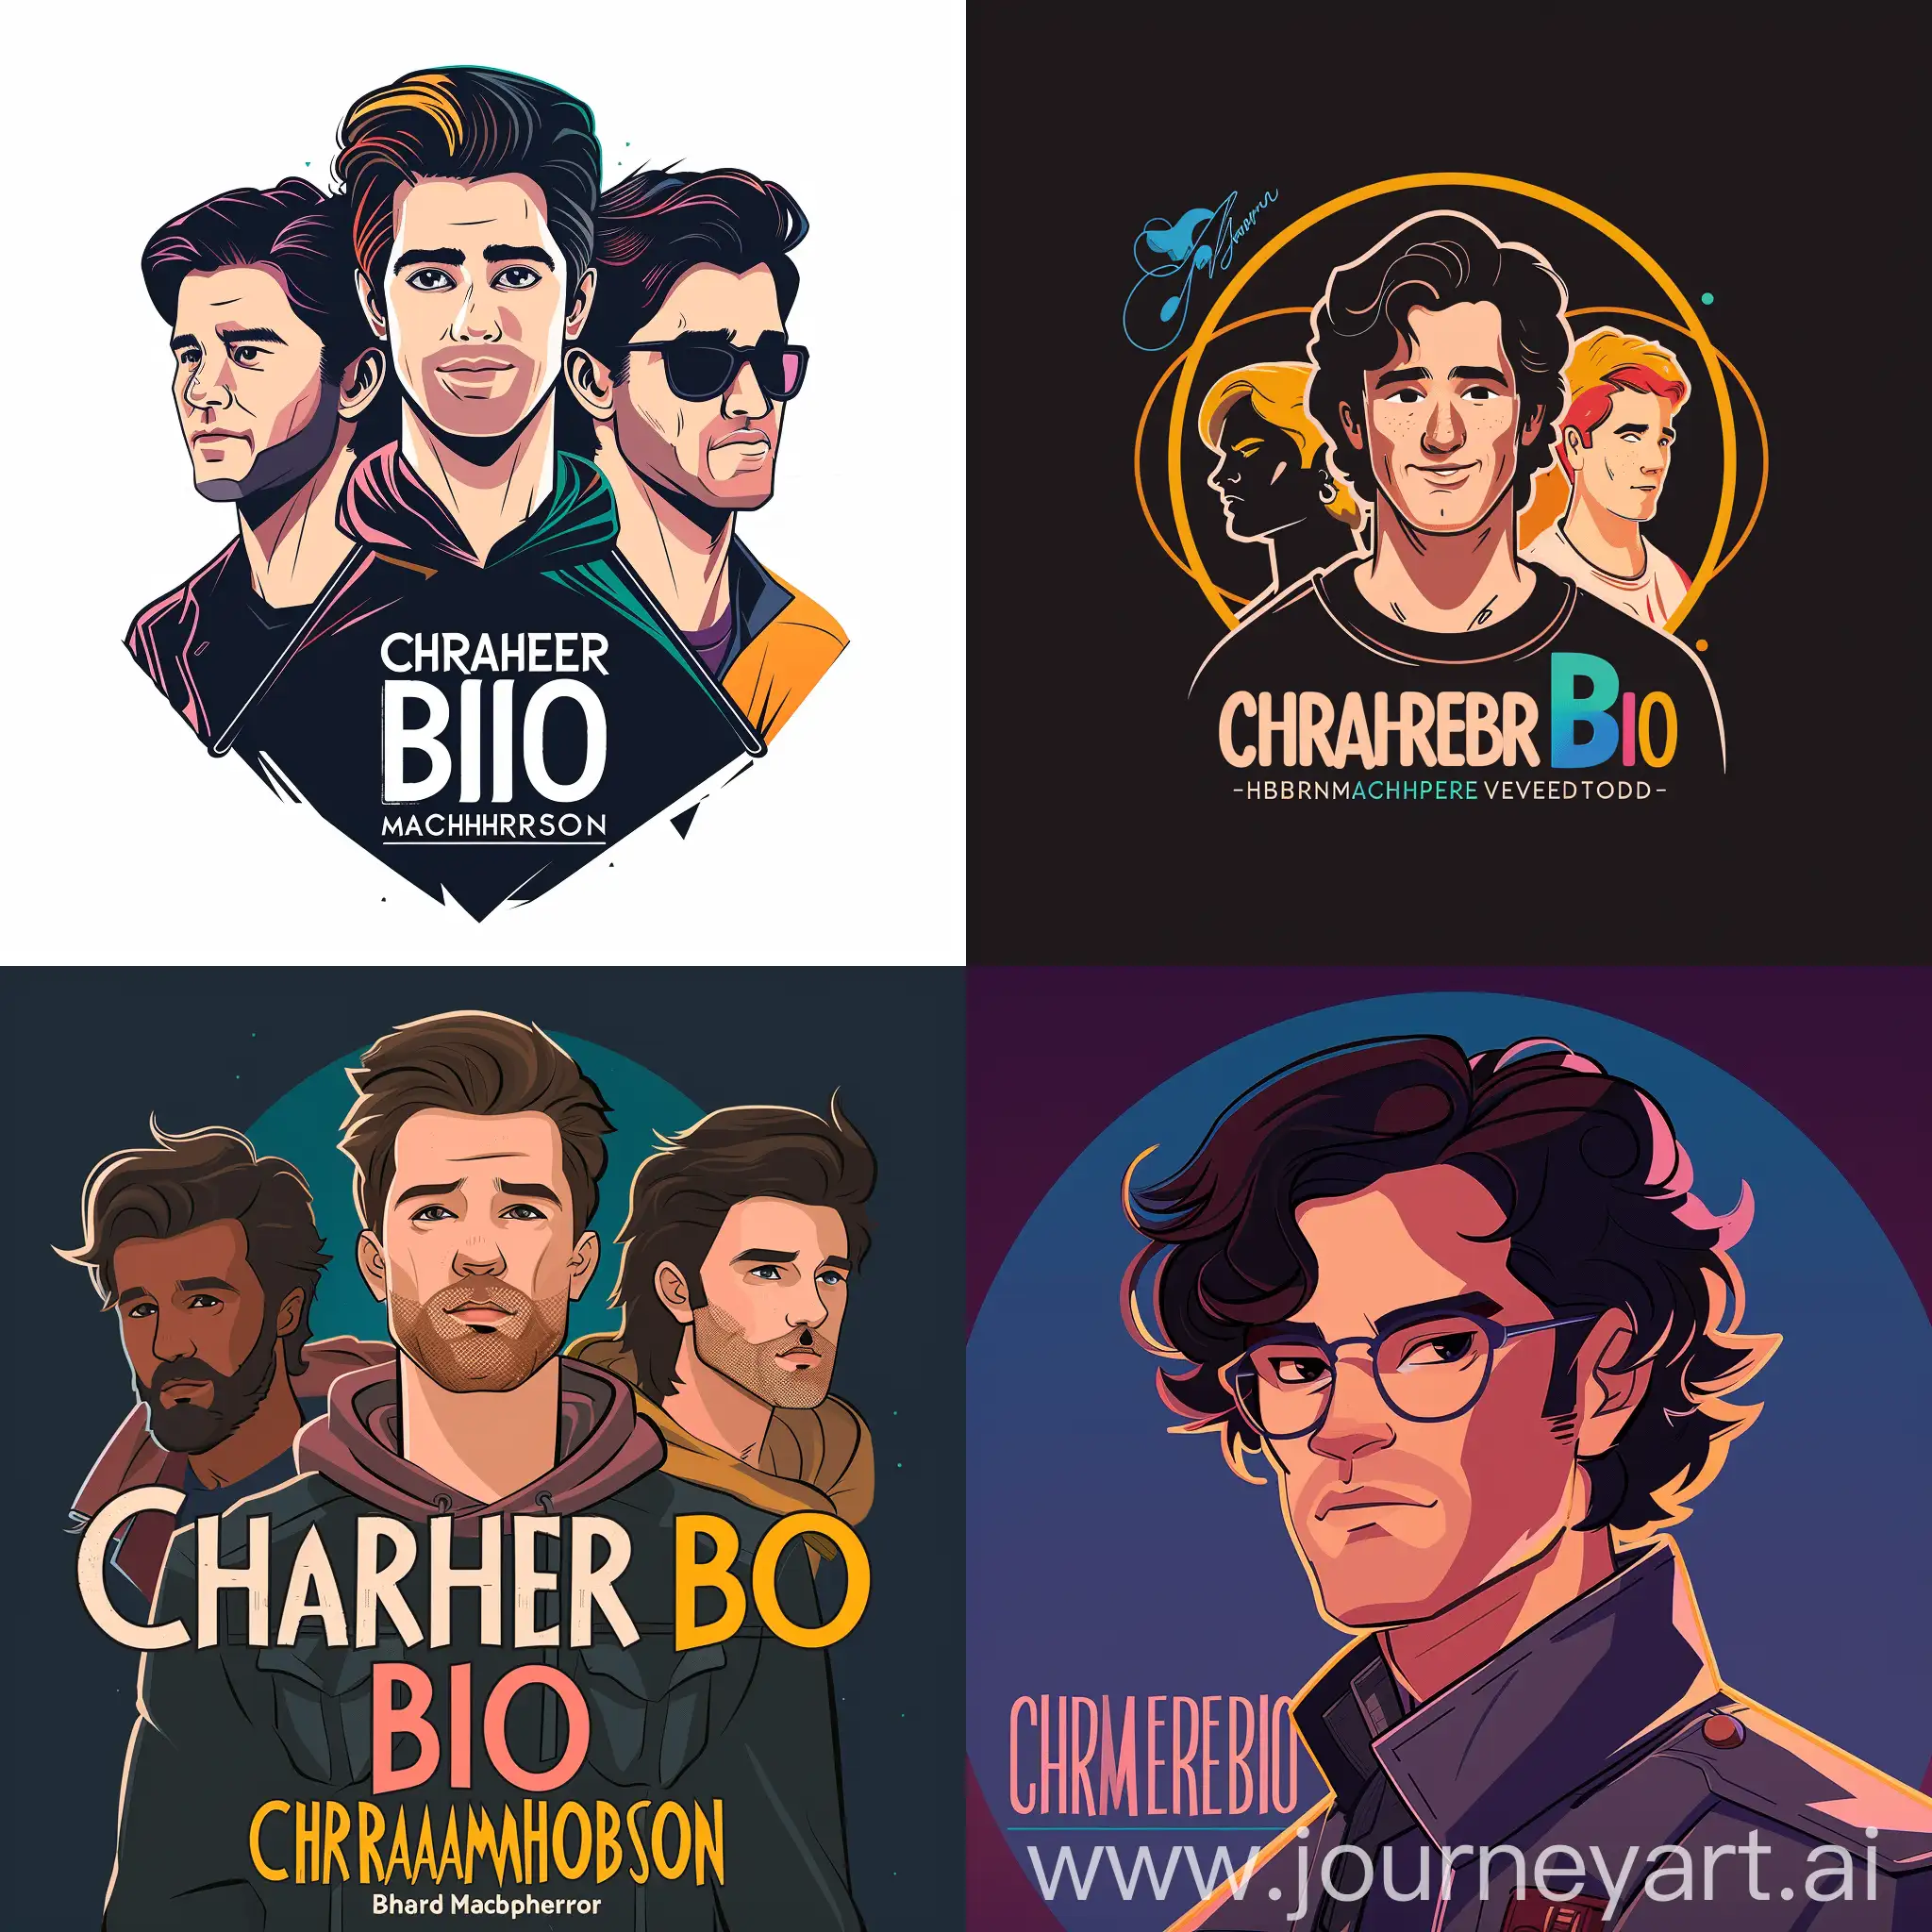 Create an animated logo for the podcast "Character Bio" featuring Brandon Macpherson, the actor from Toronto. The animation should showcase Brandon embodying the essence of various iconic characters he has portrayed throughout his career. Use a vibrant color palette and dynamic animation to capture the spirit of exploration and storytelling. The logo should visually represent the podcast's mission to delve into the depths of character psychology and narrative evolution. Ensure that Brandon's animated persona is captivating and evocative, serving as a visual representation of the podcast's thematic focus on character development.